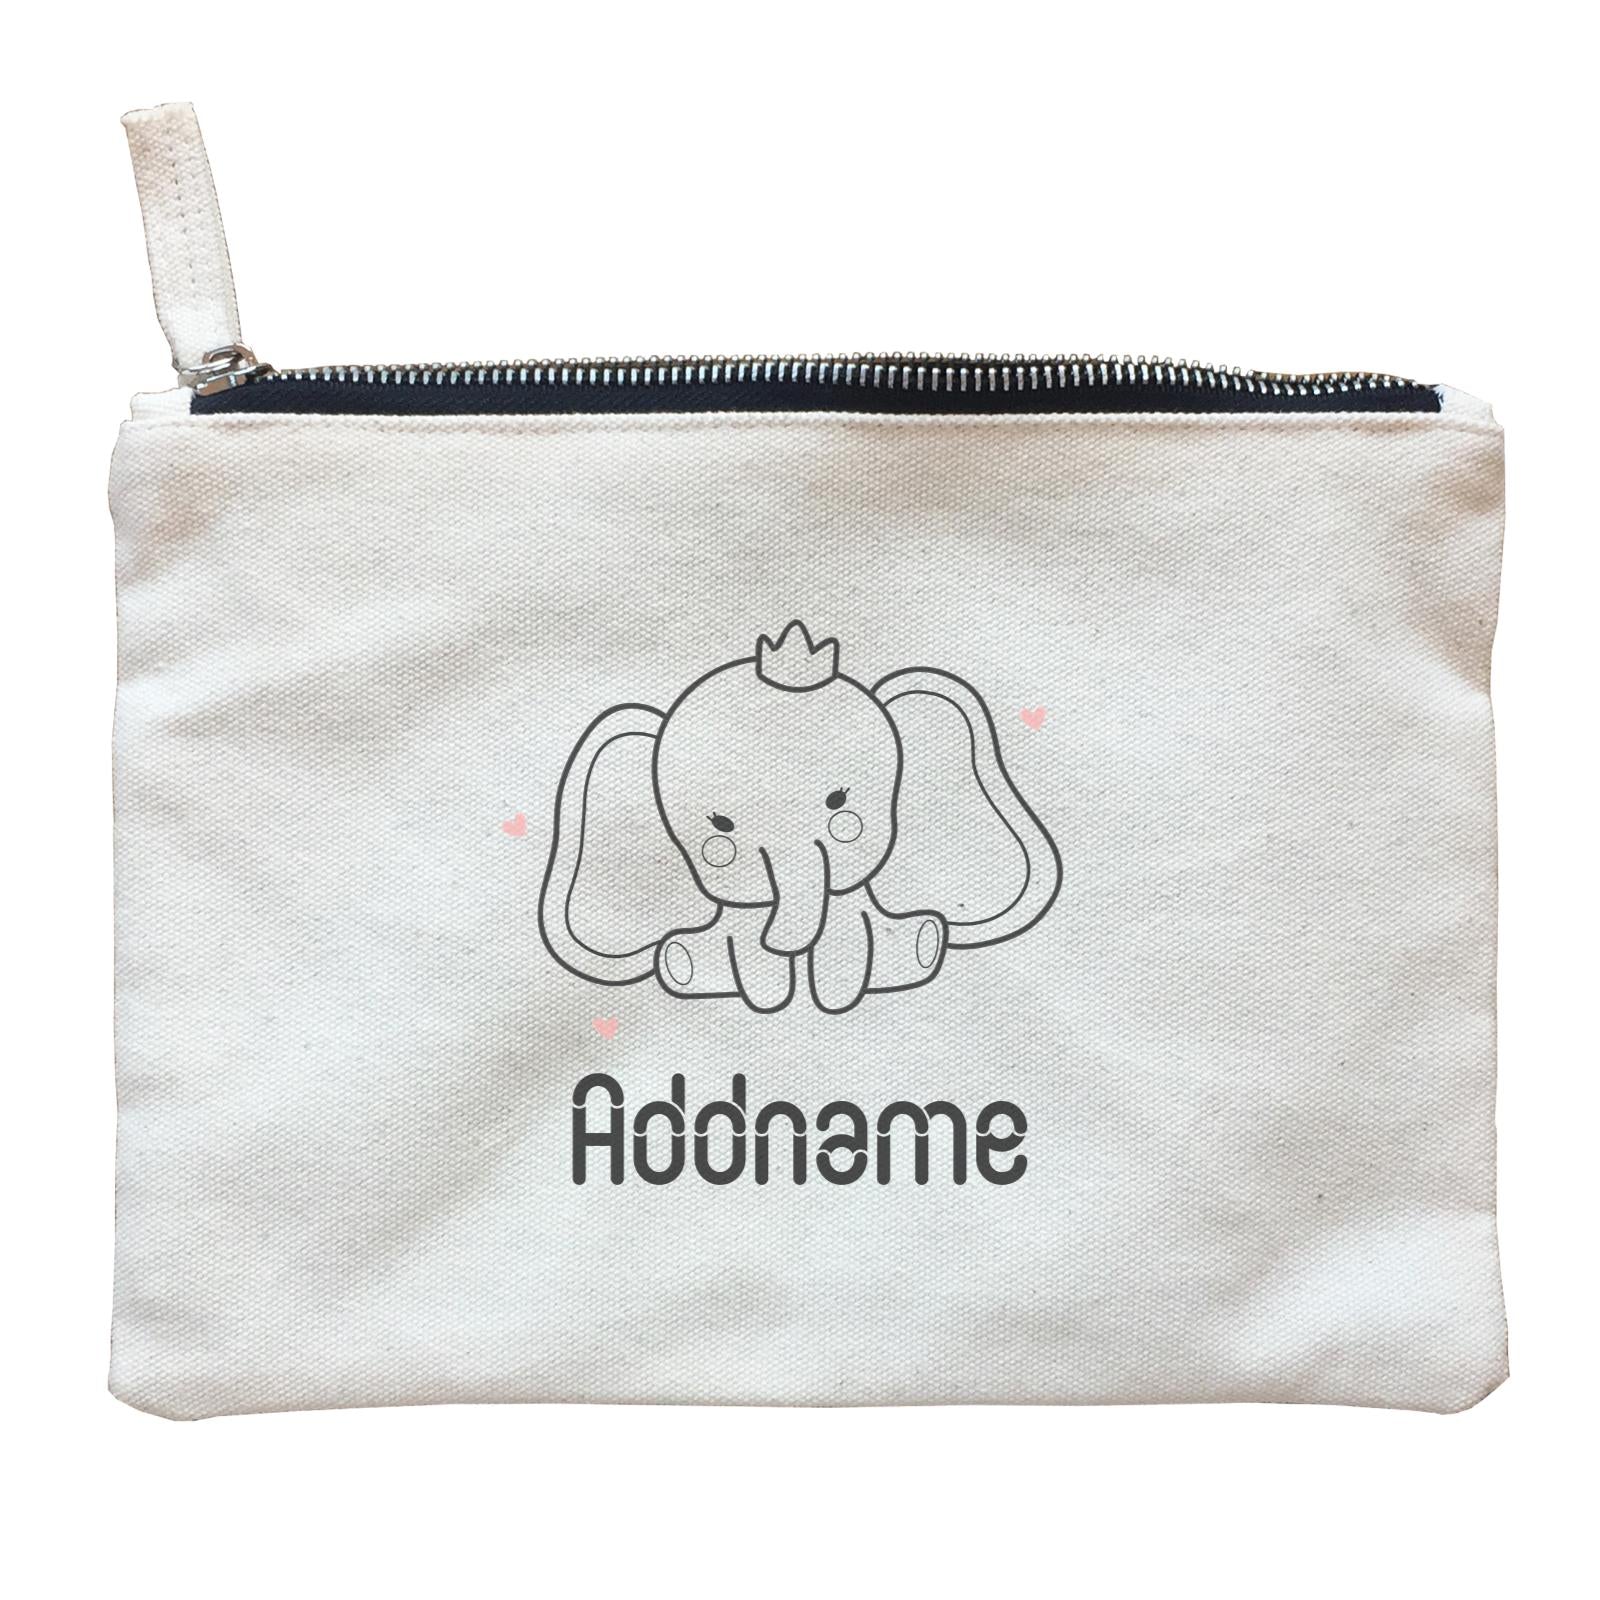 Coloring Outline Cute Hand Drawn Animals Elephants Baby Elephants With Crown Addname Zipper Pouch